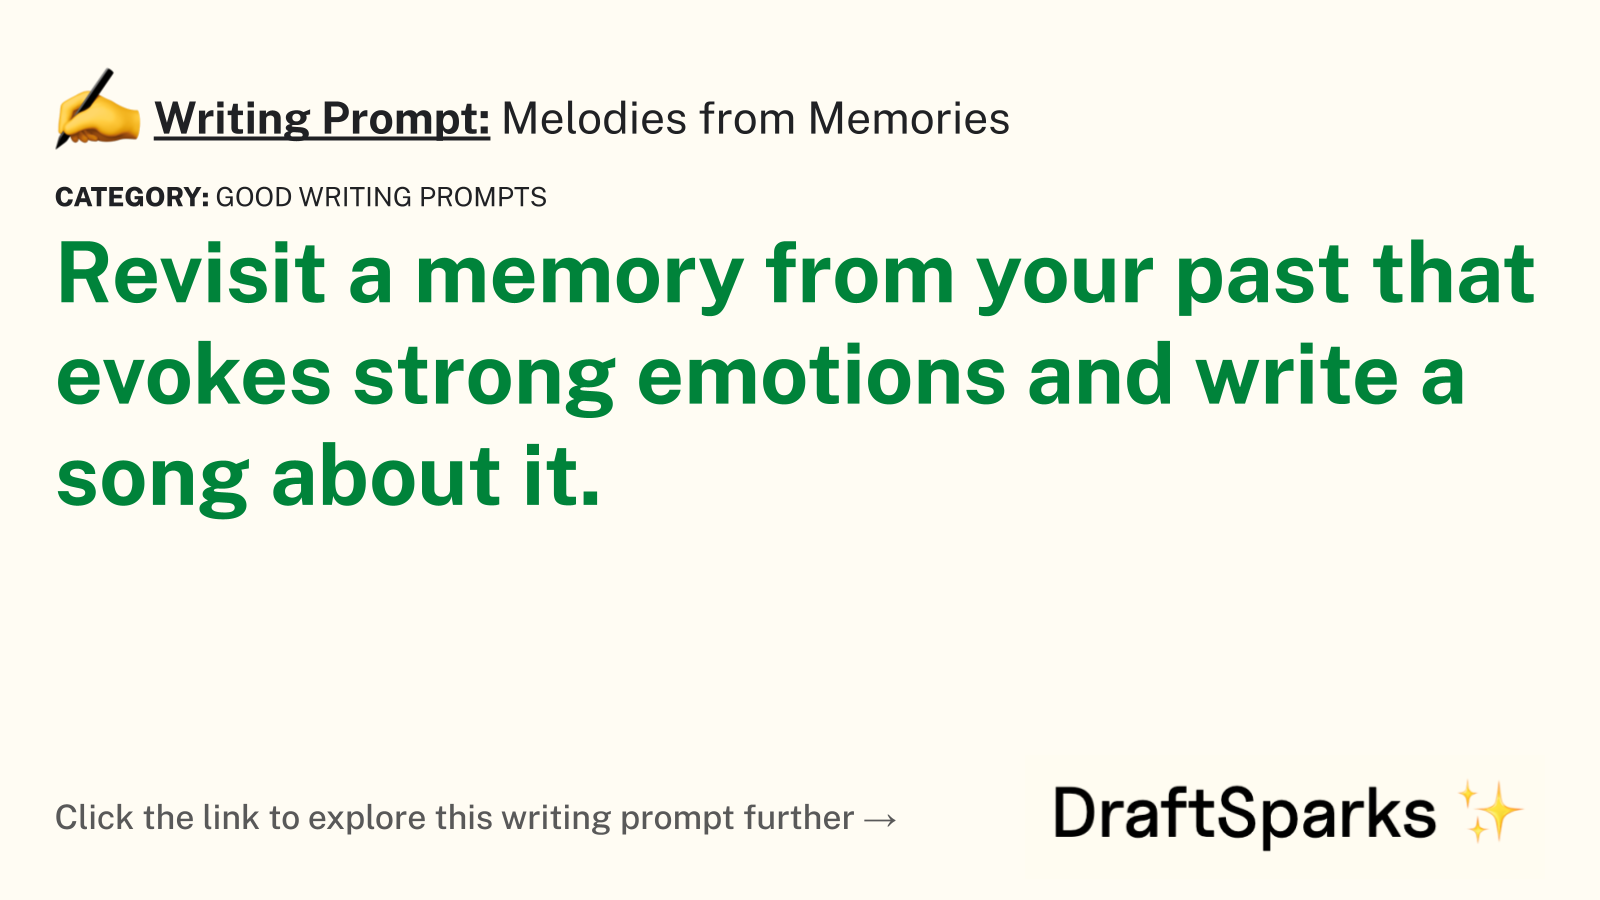 Melodies from Memories